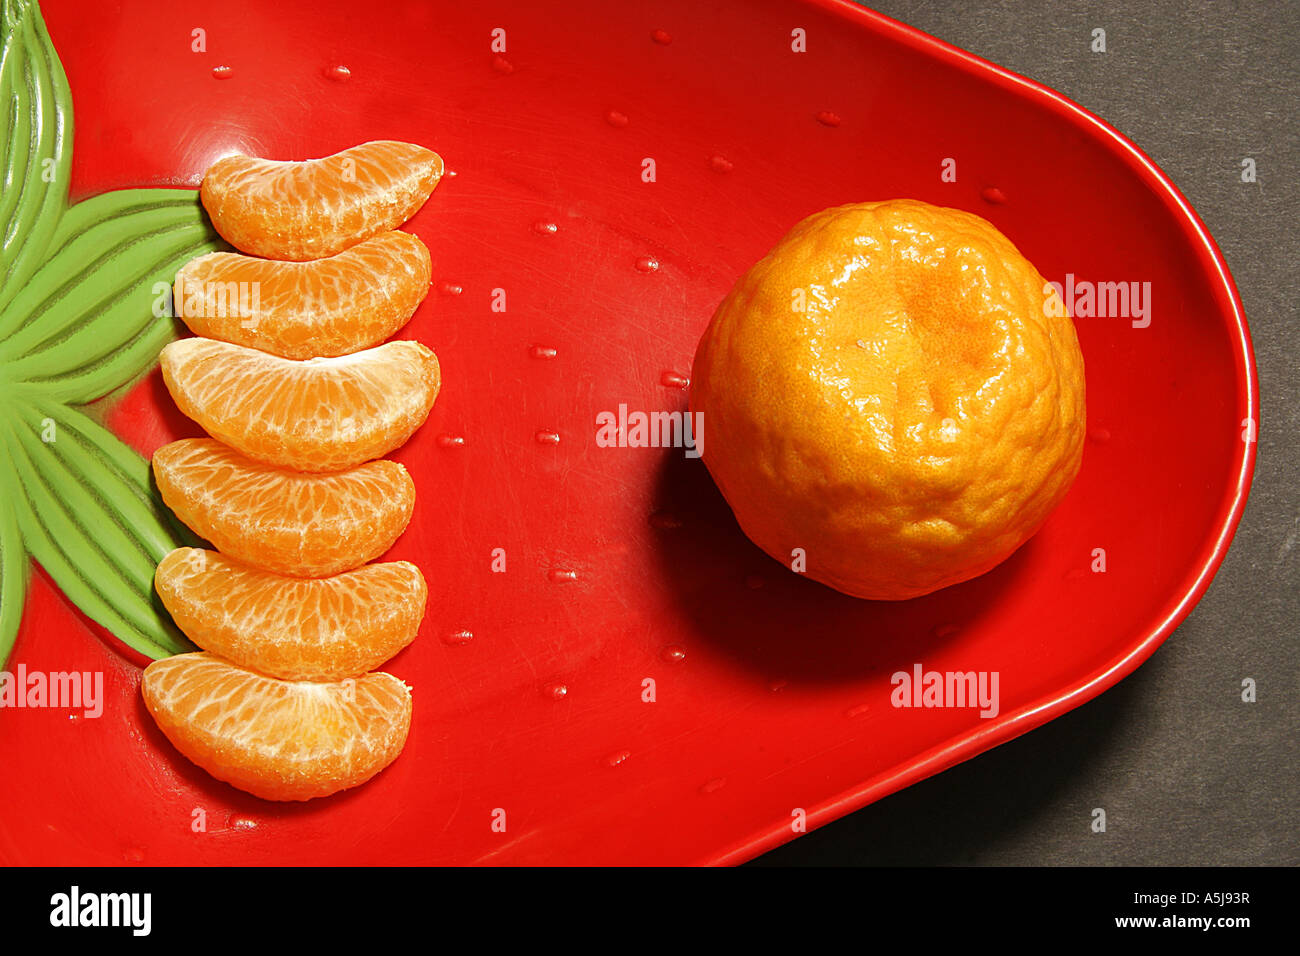 one full orange fruit and six pieces of orange in a red bowl Stock Photo